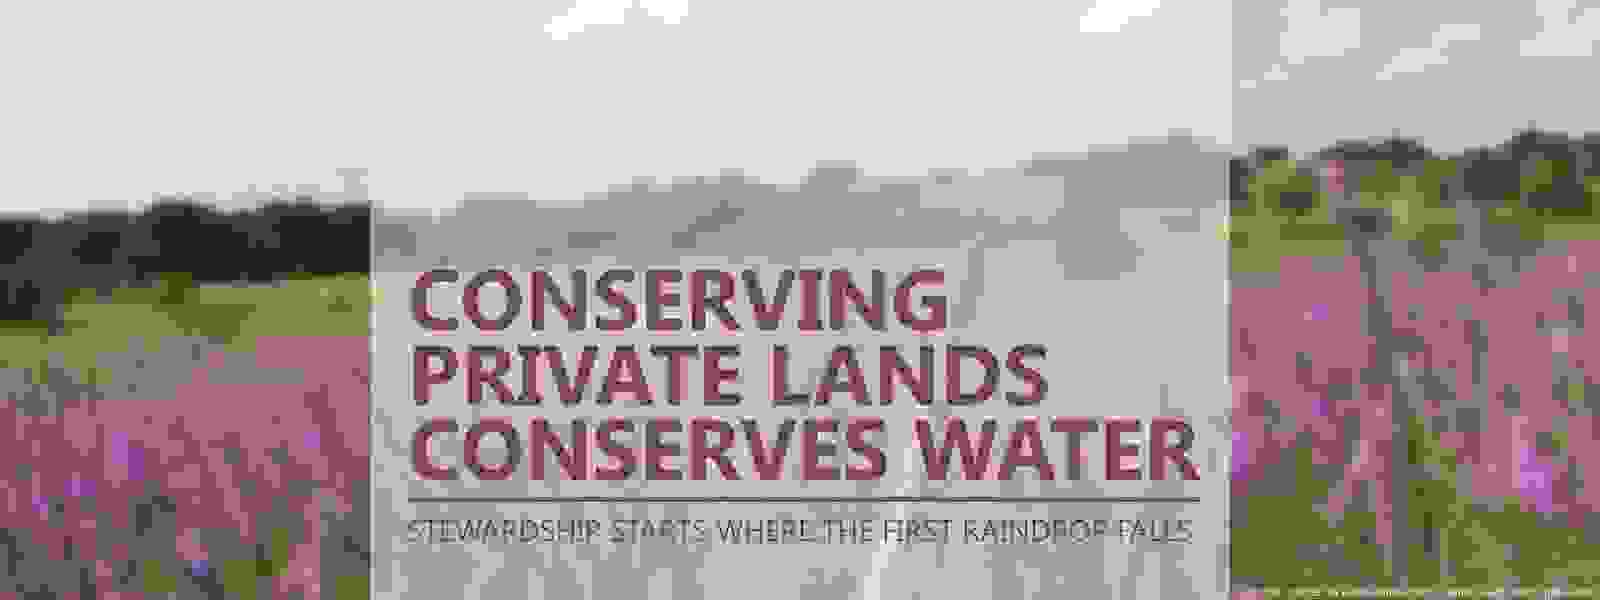 Conserving private lands conserves water